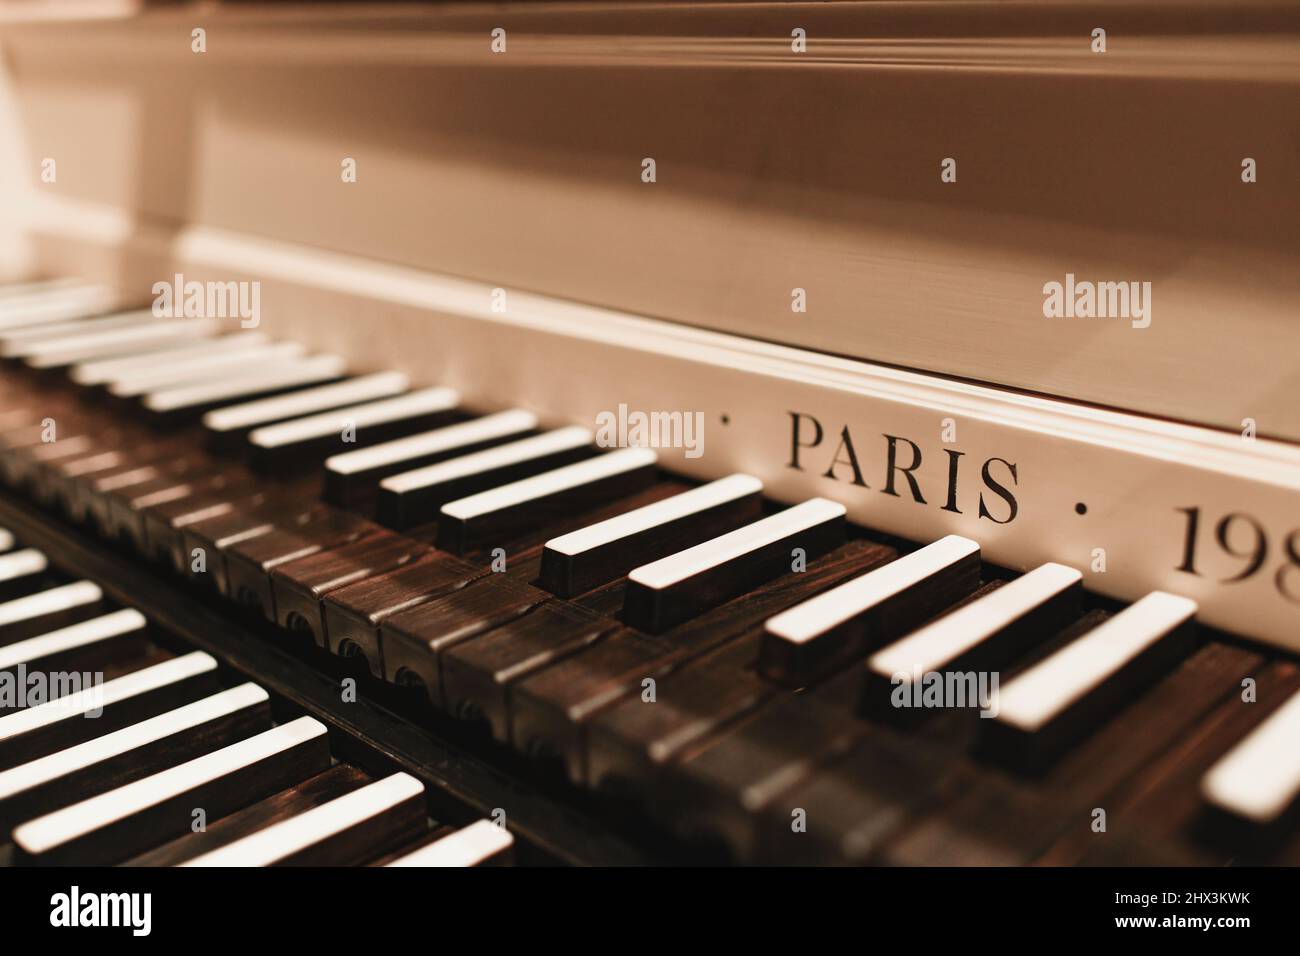 Vintage french harpsichord Black and white Keyboard Stock Photo